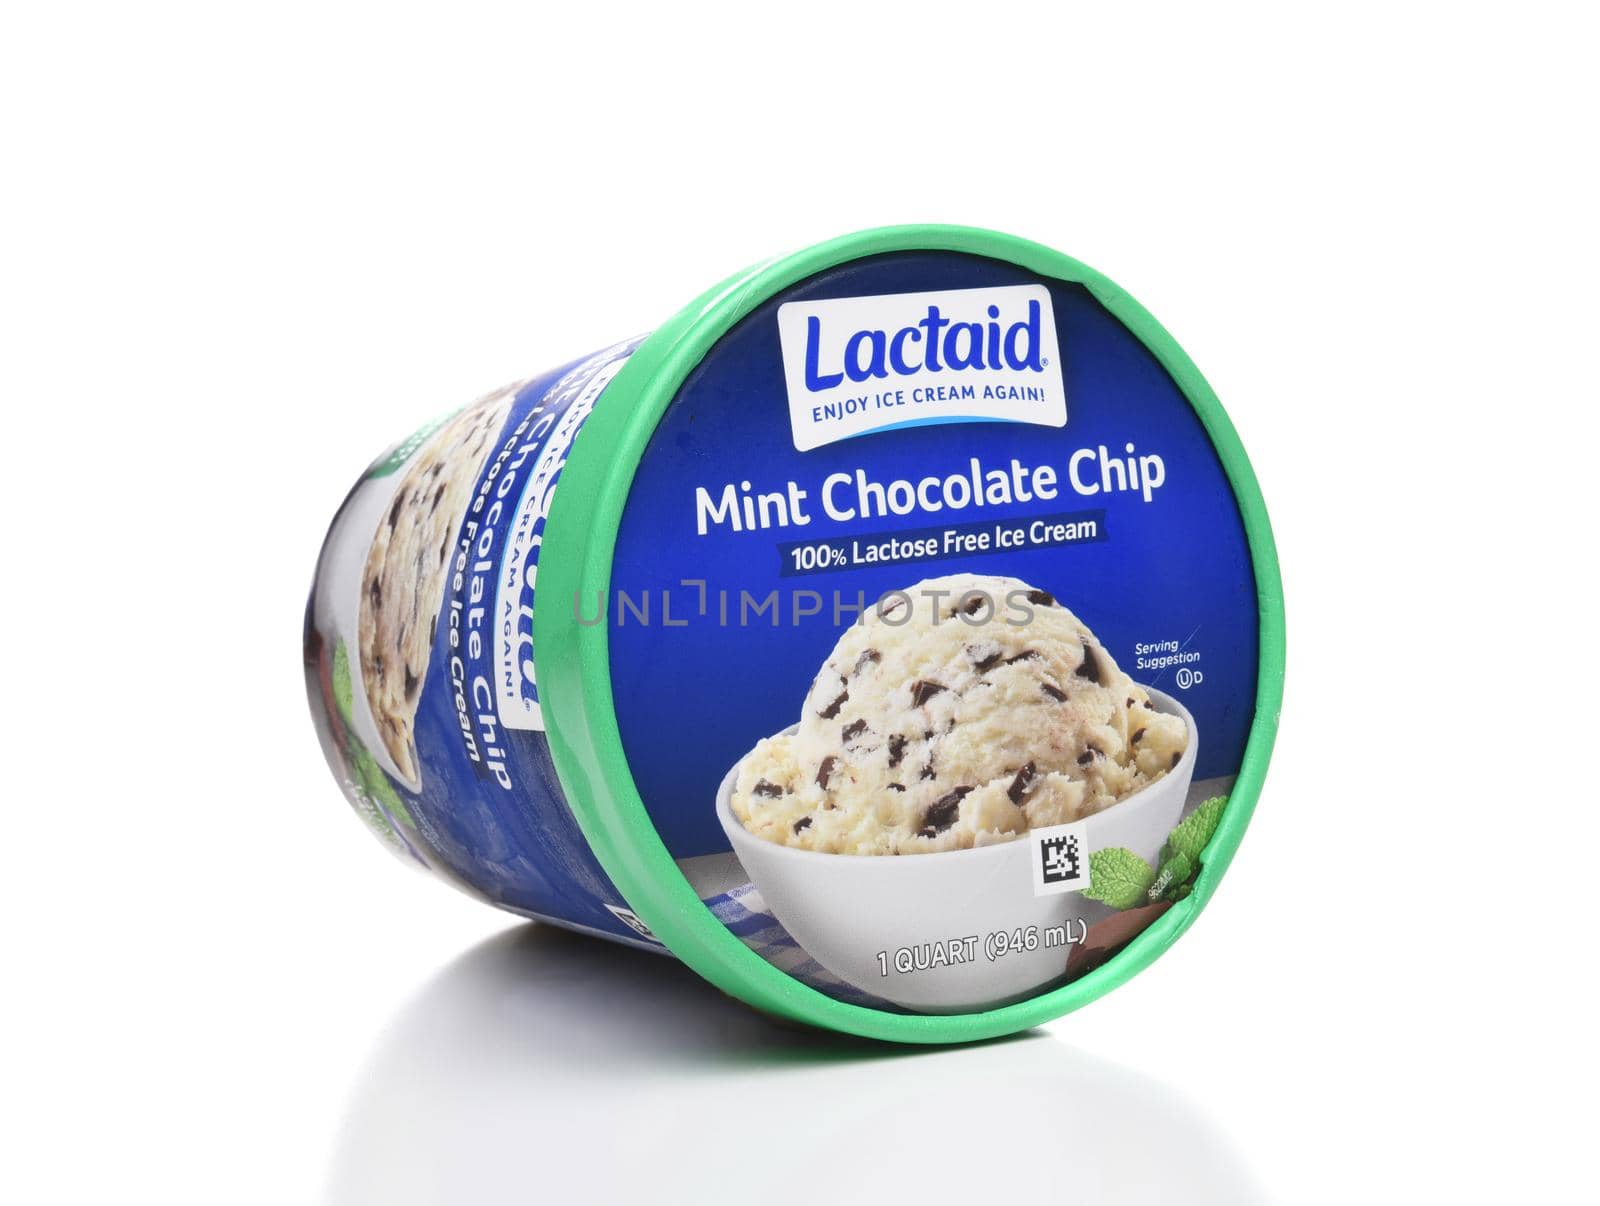  A carton of Lactaid Lactose Free Mint Chocolate Chip Ice Cream by sCukrov